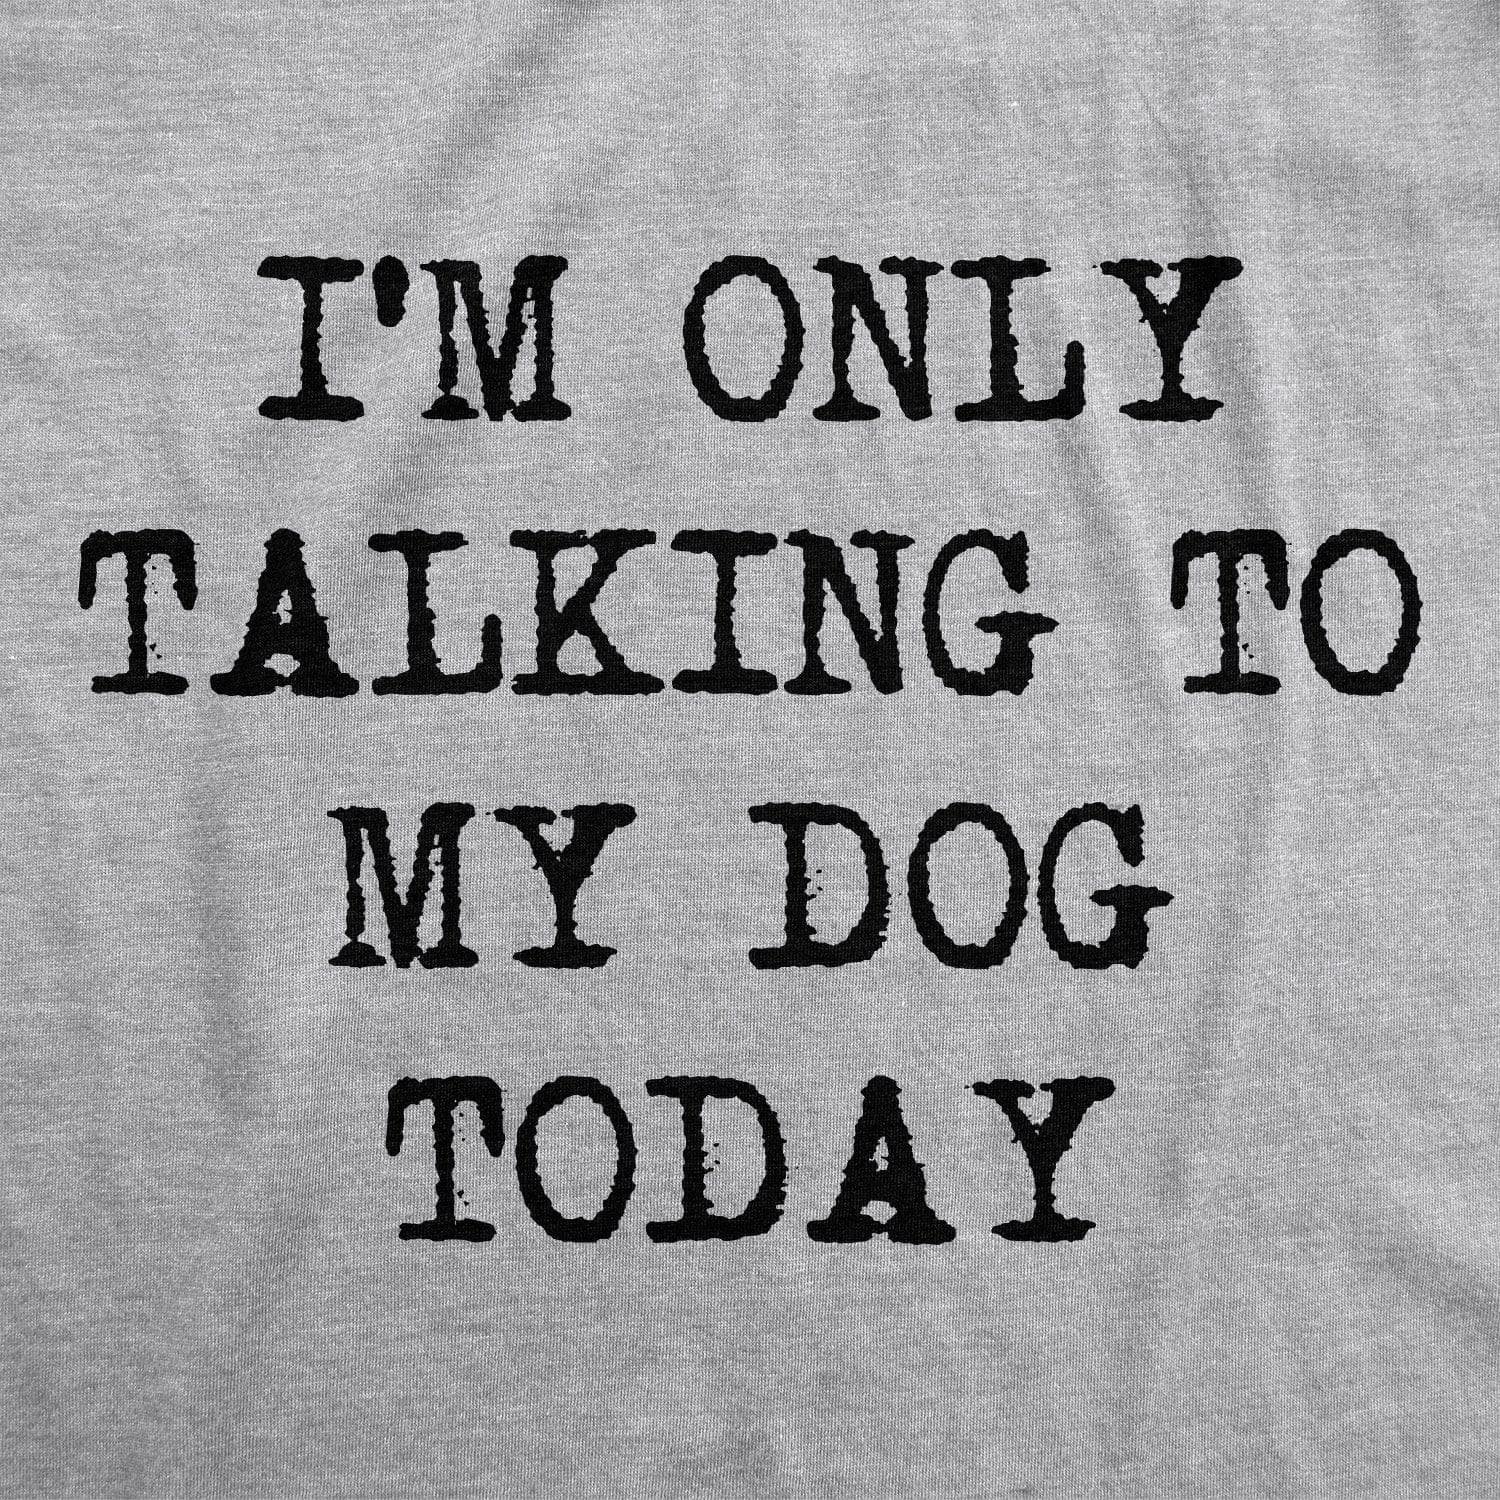 Only Talking To My Dog Today  -  Crazy Dog T-Shirts